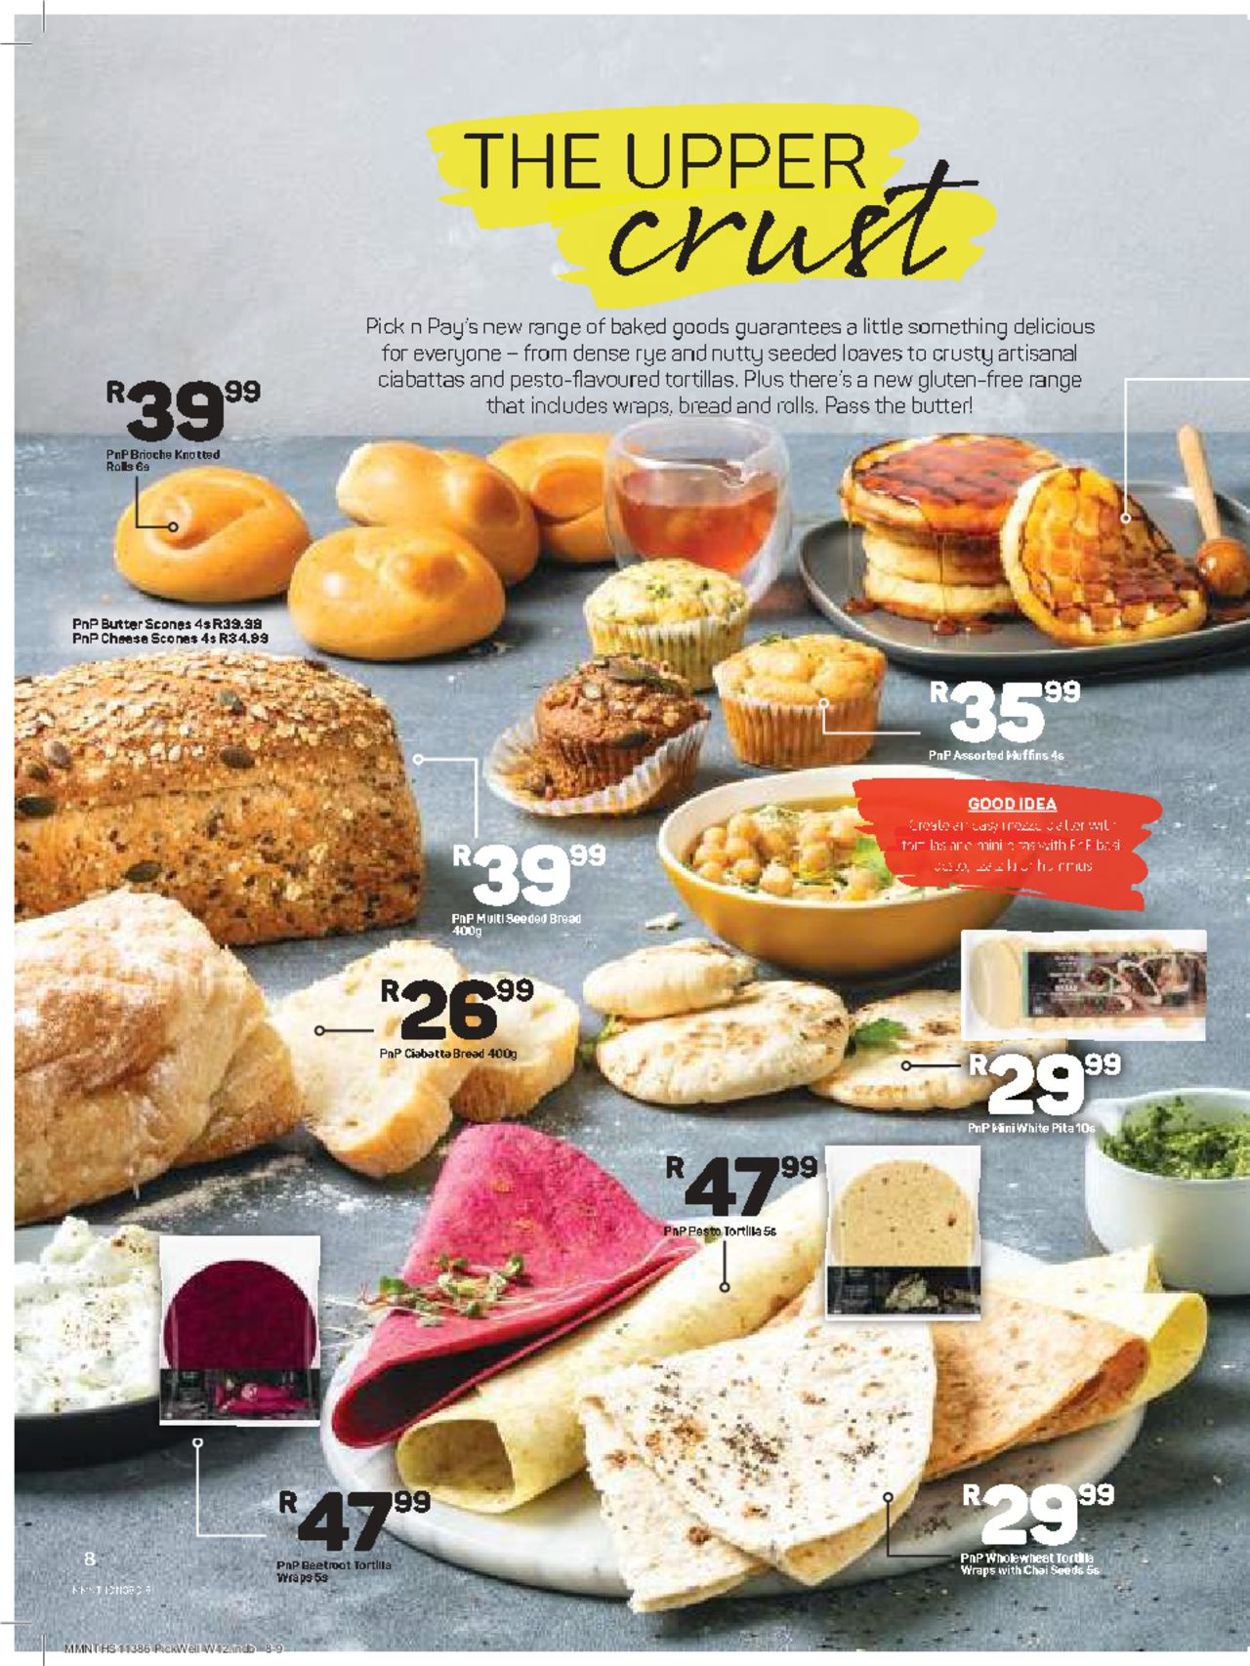 Pick n Pay Catalogue - 2019/05/20-2019/06/02 (Page 8)